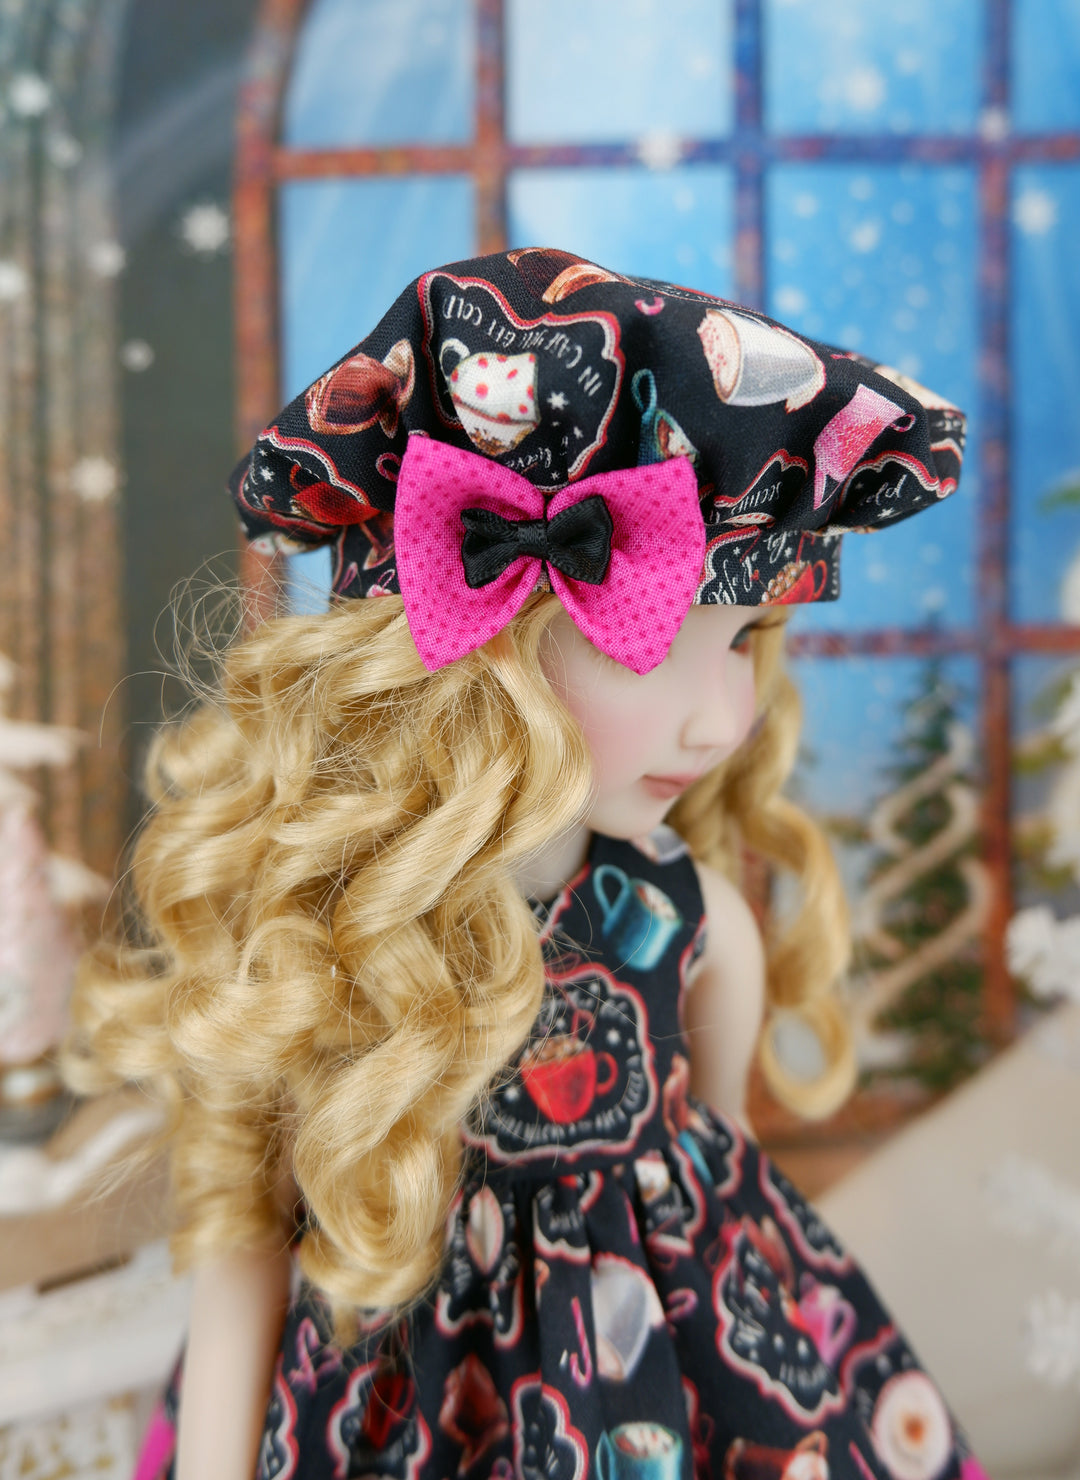 Festive Cocoa - dress with boots for Ruby Red Fashion Friends doll